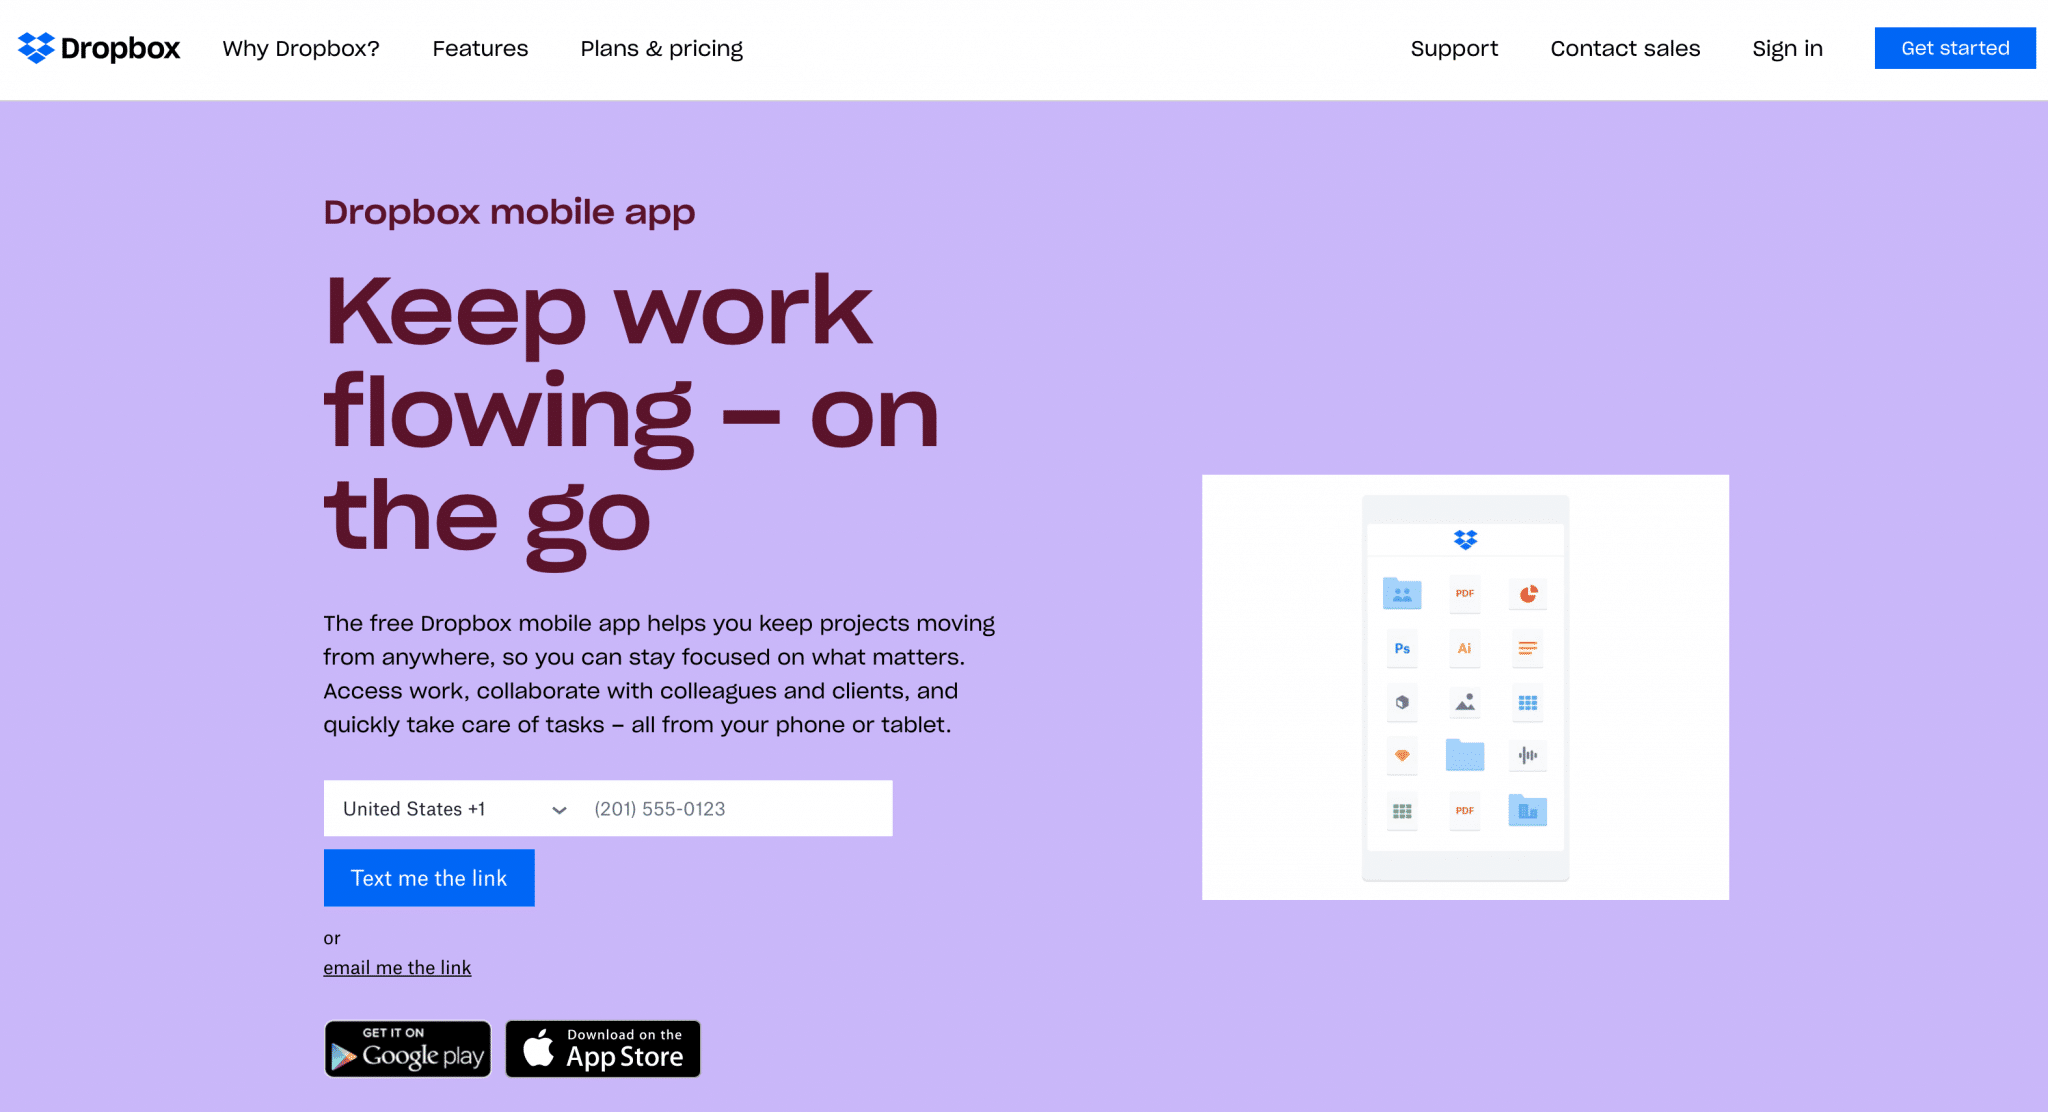 Landing page of the free Dropbox mobile app.